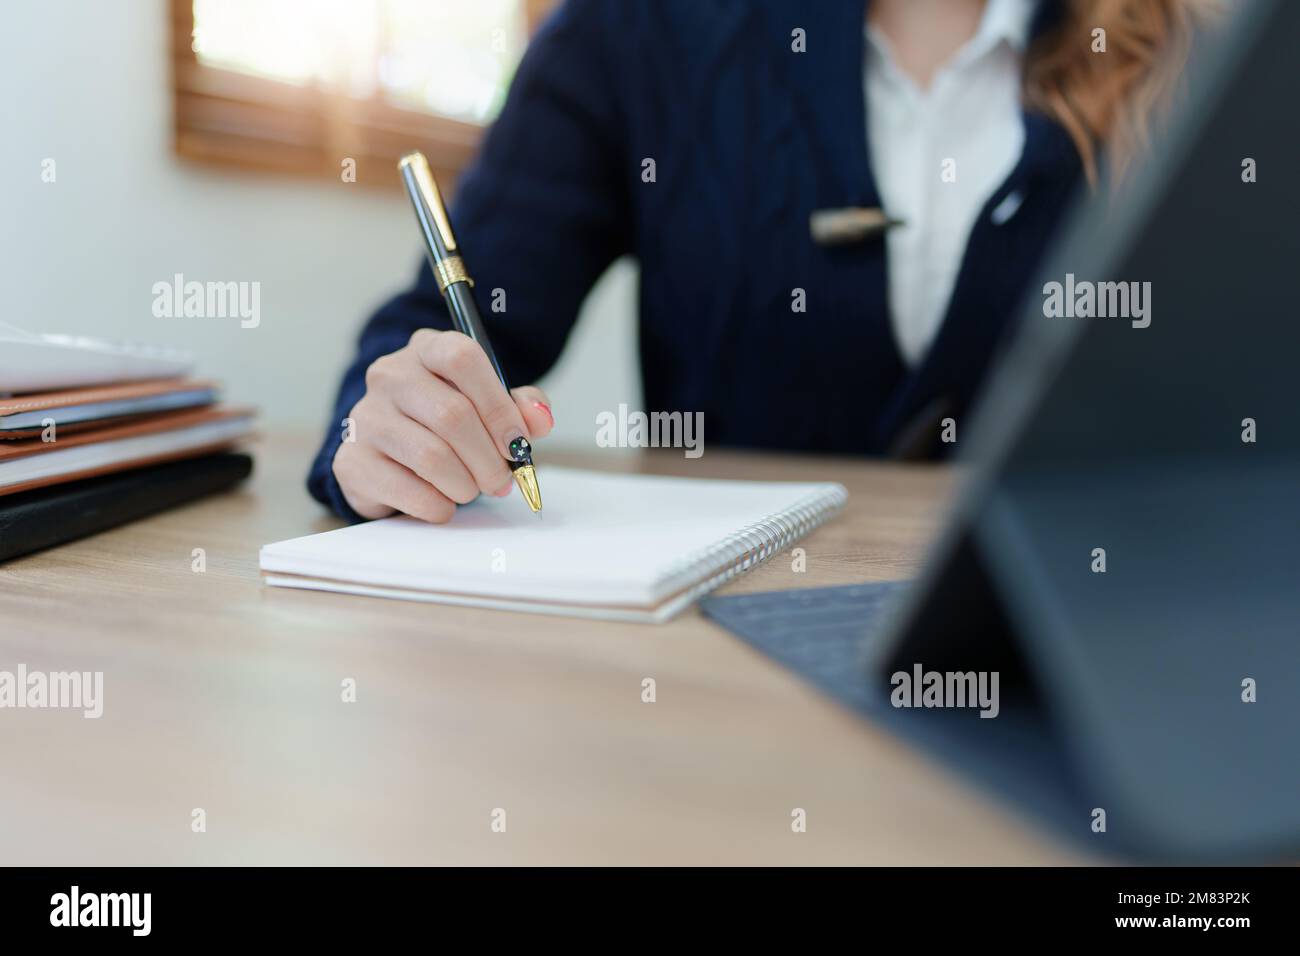 Portrait of a young Asian man showing a smiling face as she uses his notebook, tablet computer and financial documents on her desk in the early Stock Photo